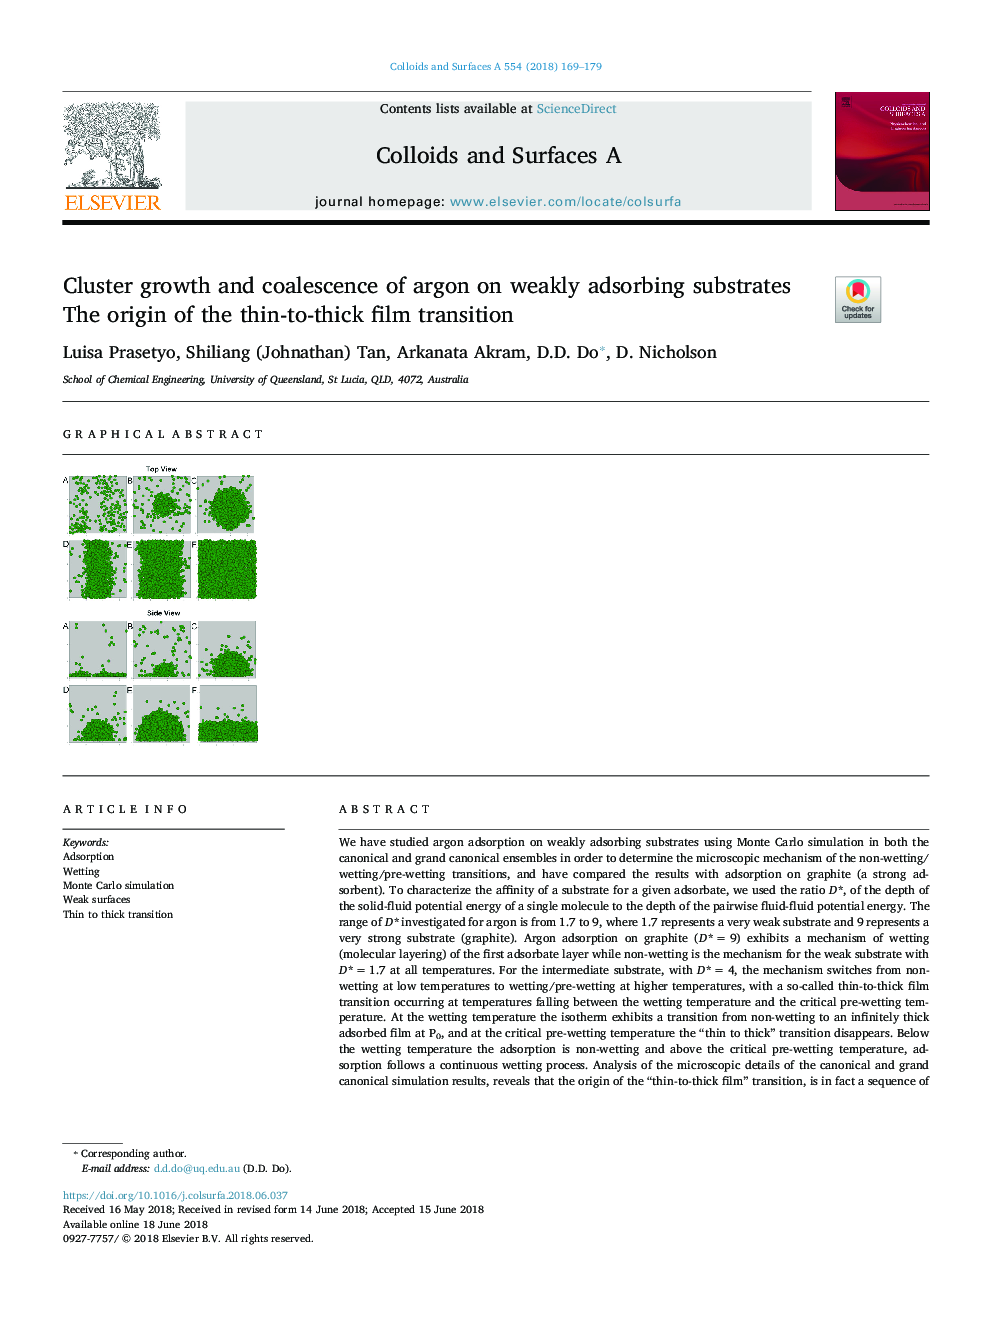 Cluster growth and coalescence of argon on weakly adsorbing substrates